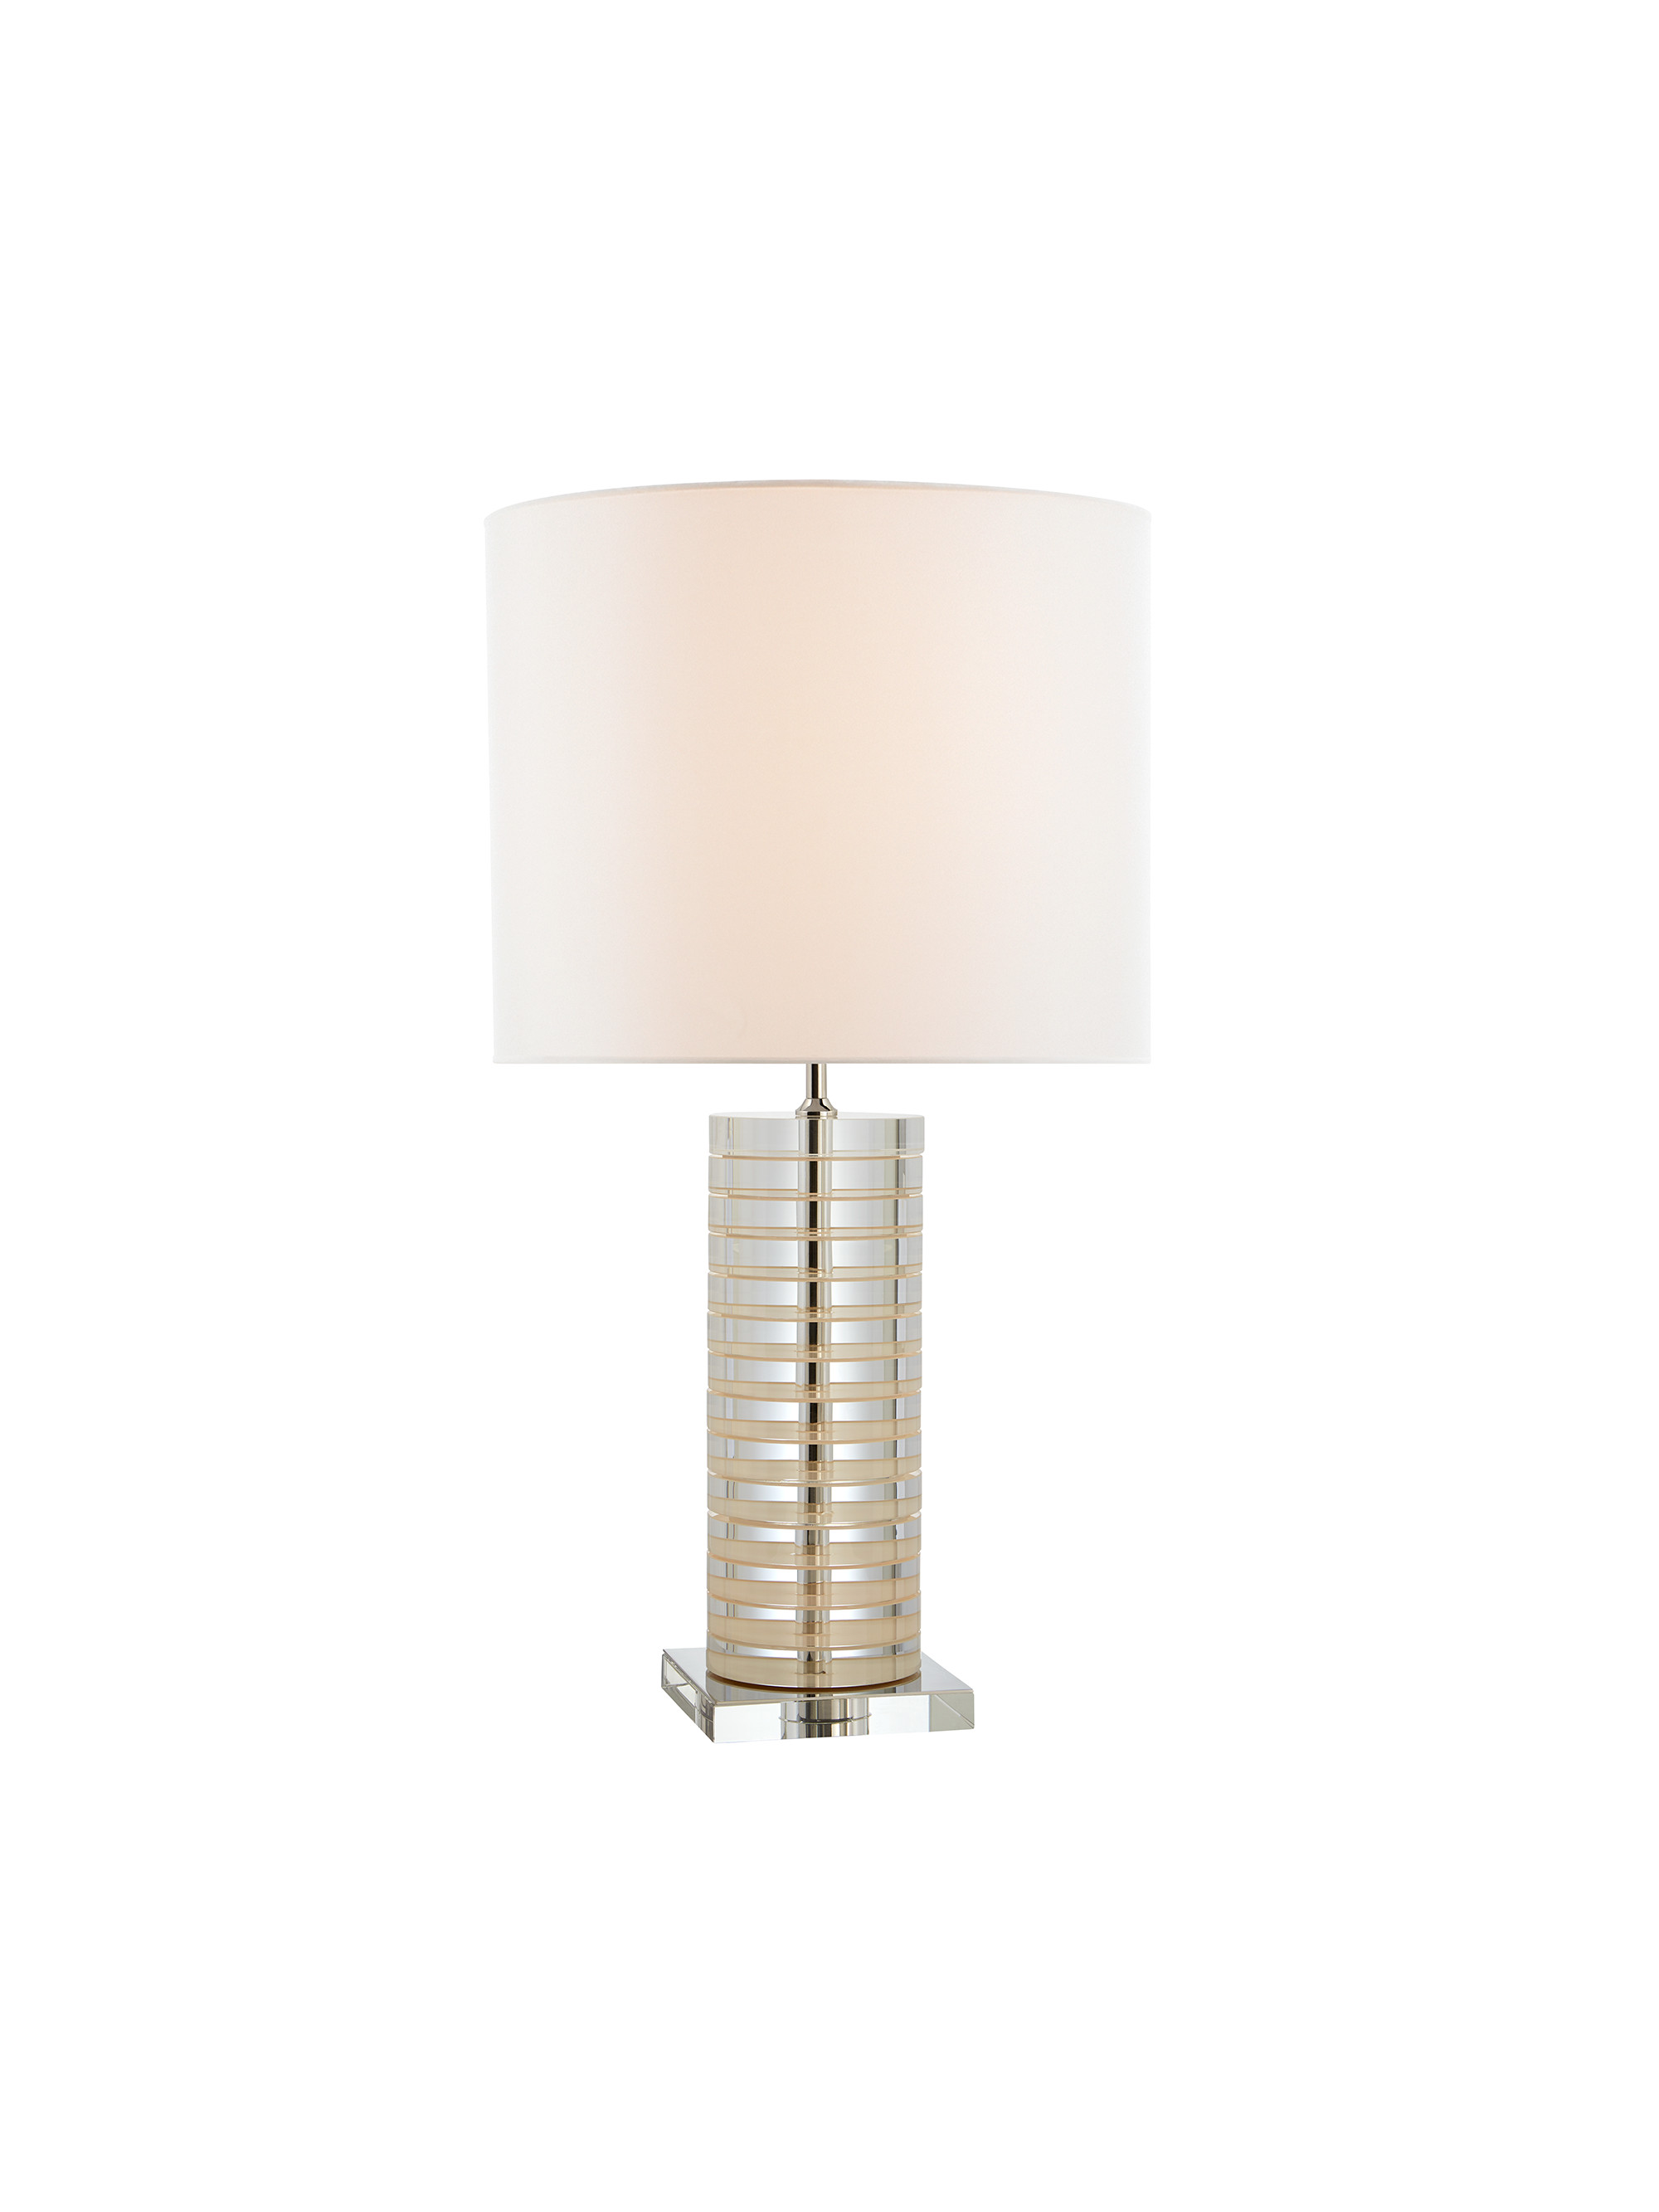 grayson stacked table lamp